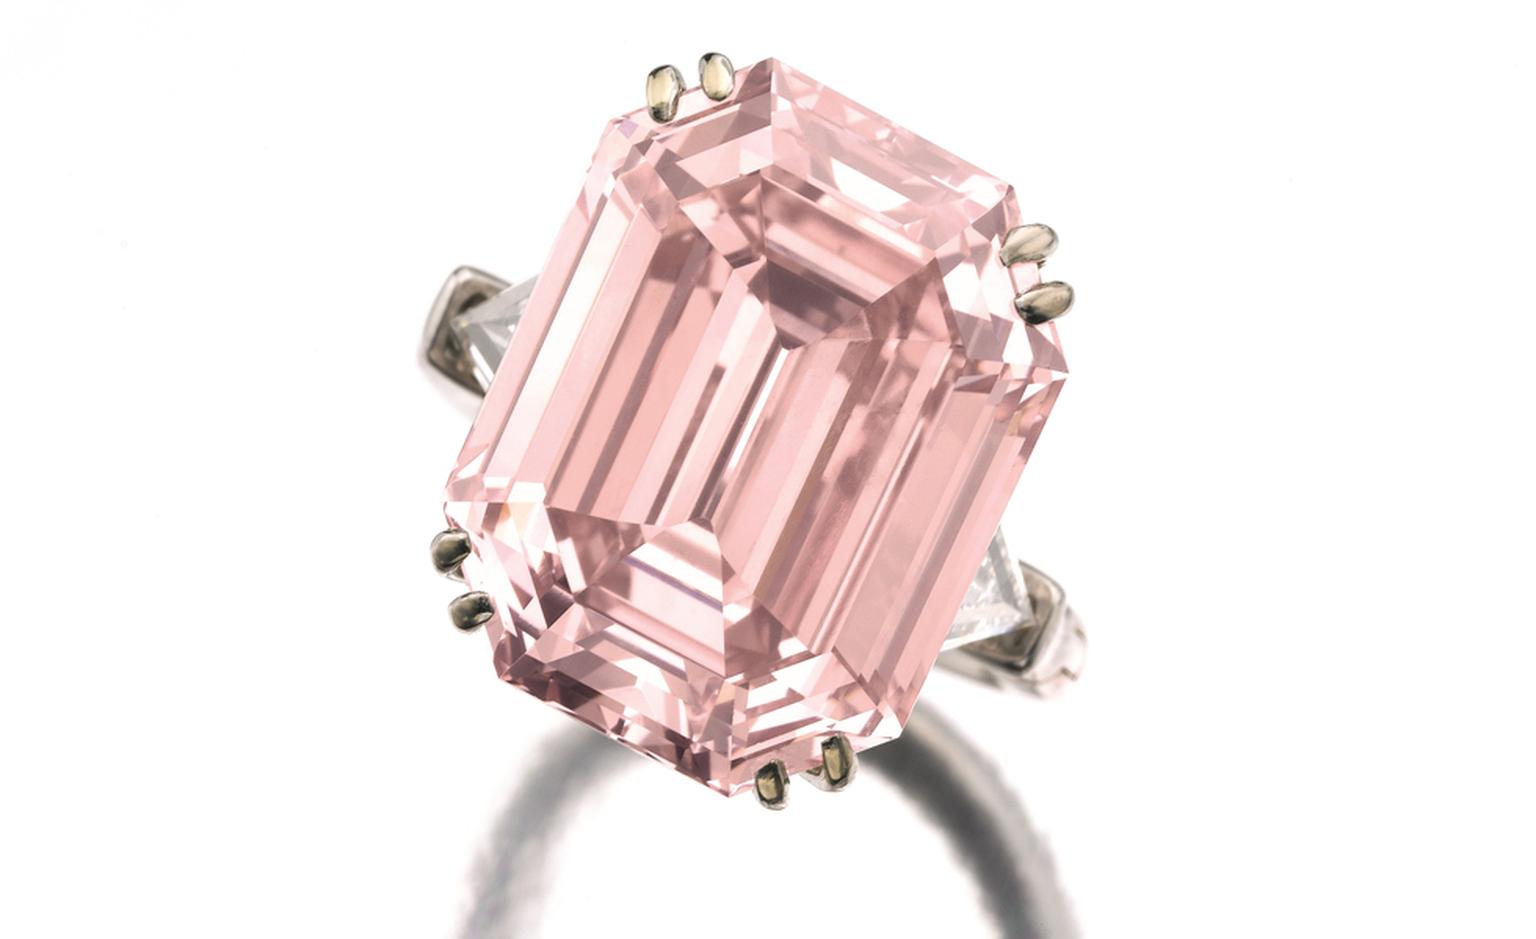 Lot 491. Very important and rare fancy intense pink diamond ring sold for US10.8 million (CHF 9,602,500) making it the 9th highest price paid for a pink diamond at auction. The pre-sale estimate was CHF 8,300,000 - CHF 14,8000,000